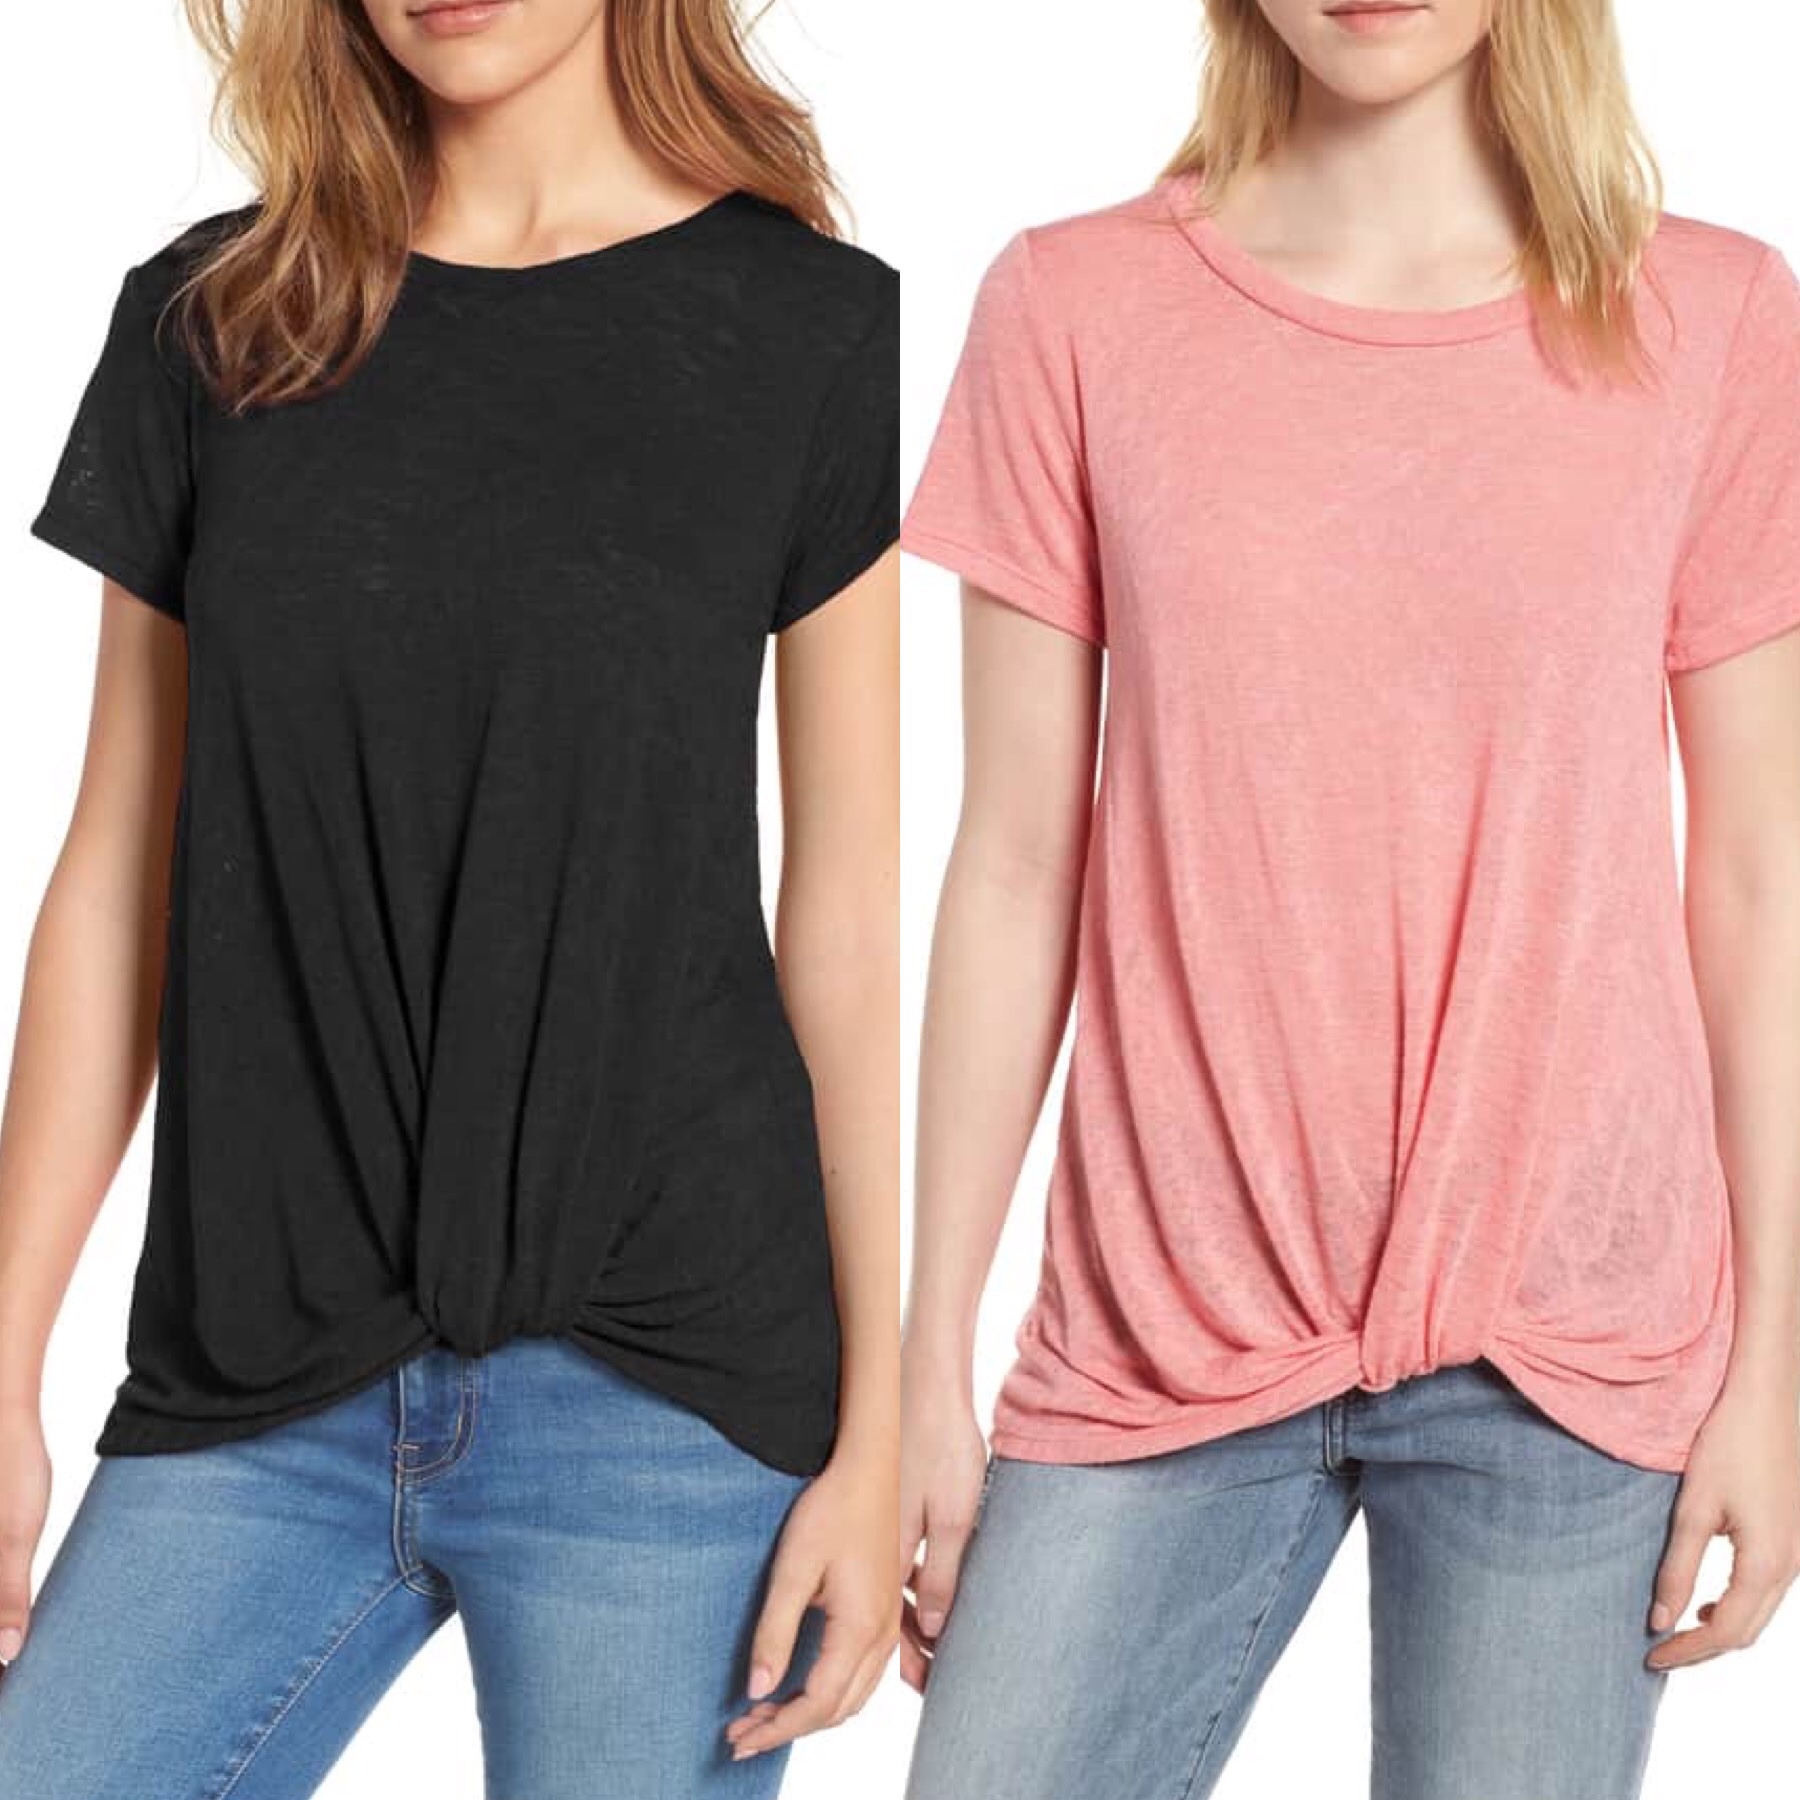 Perfect Summer Tees + Nordstrom Giveaway!! | The Double Take Girls Blog